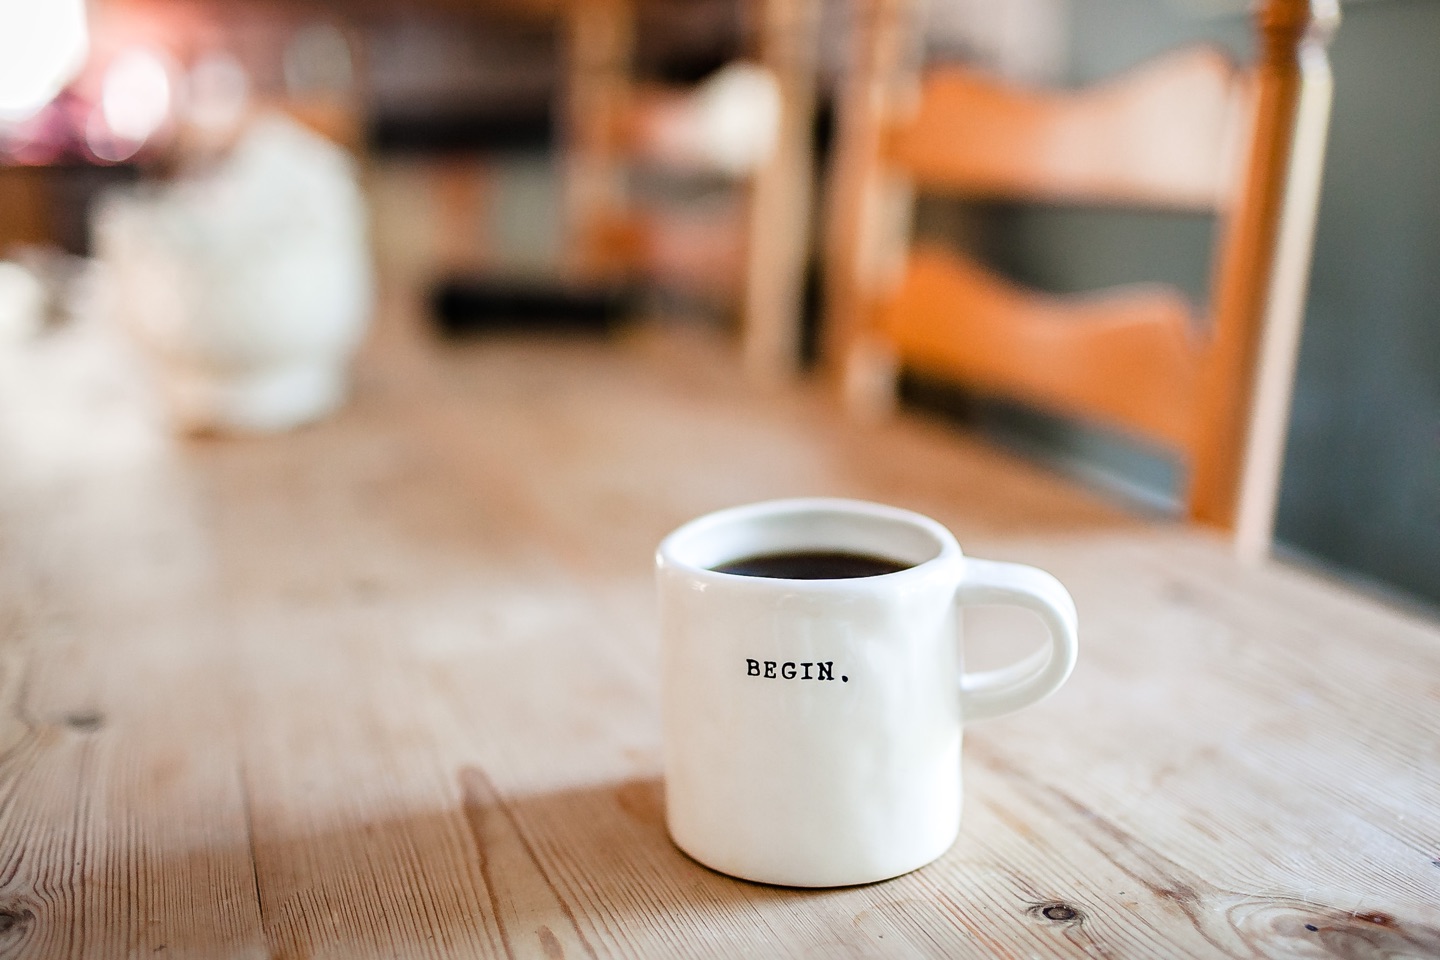 Coffee mug that says "begin" on a kitchen table